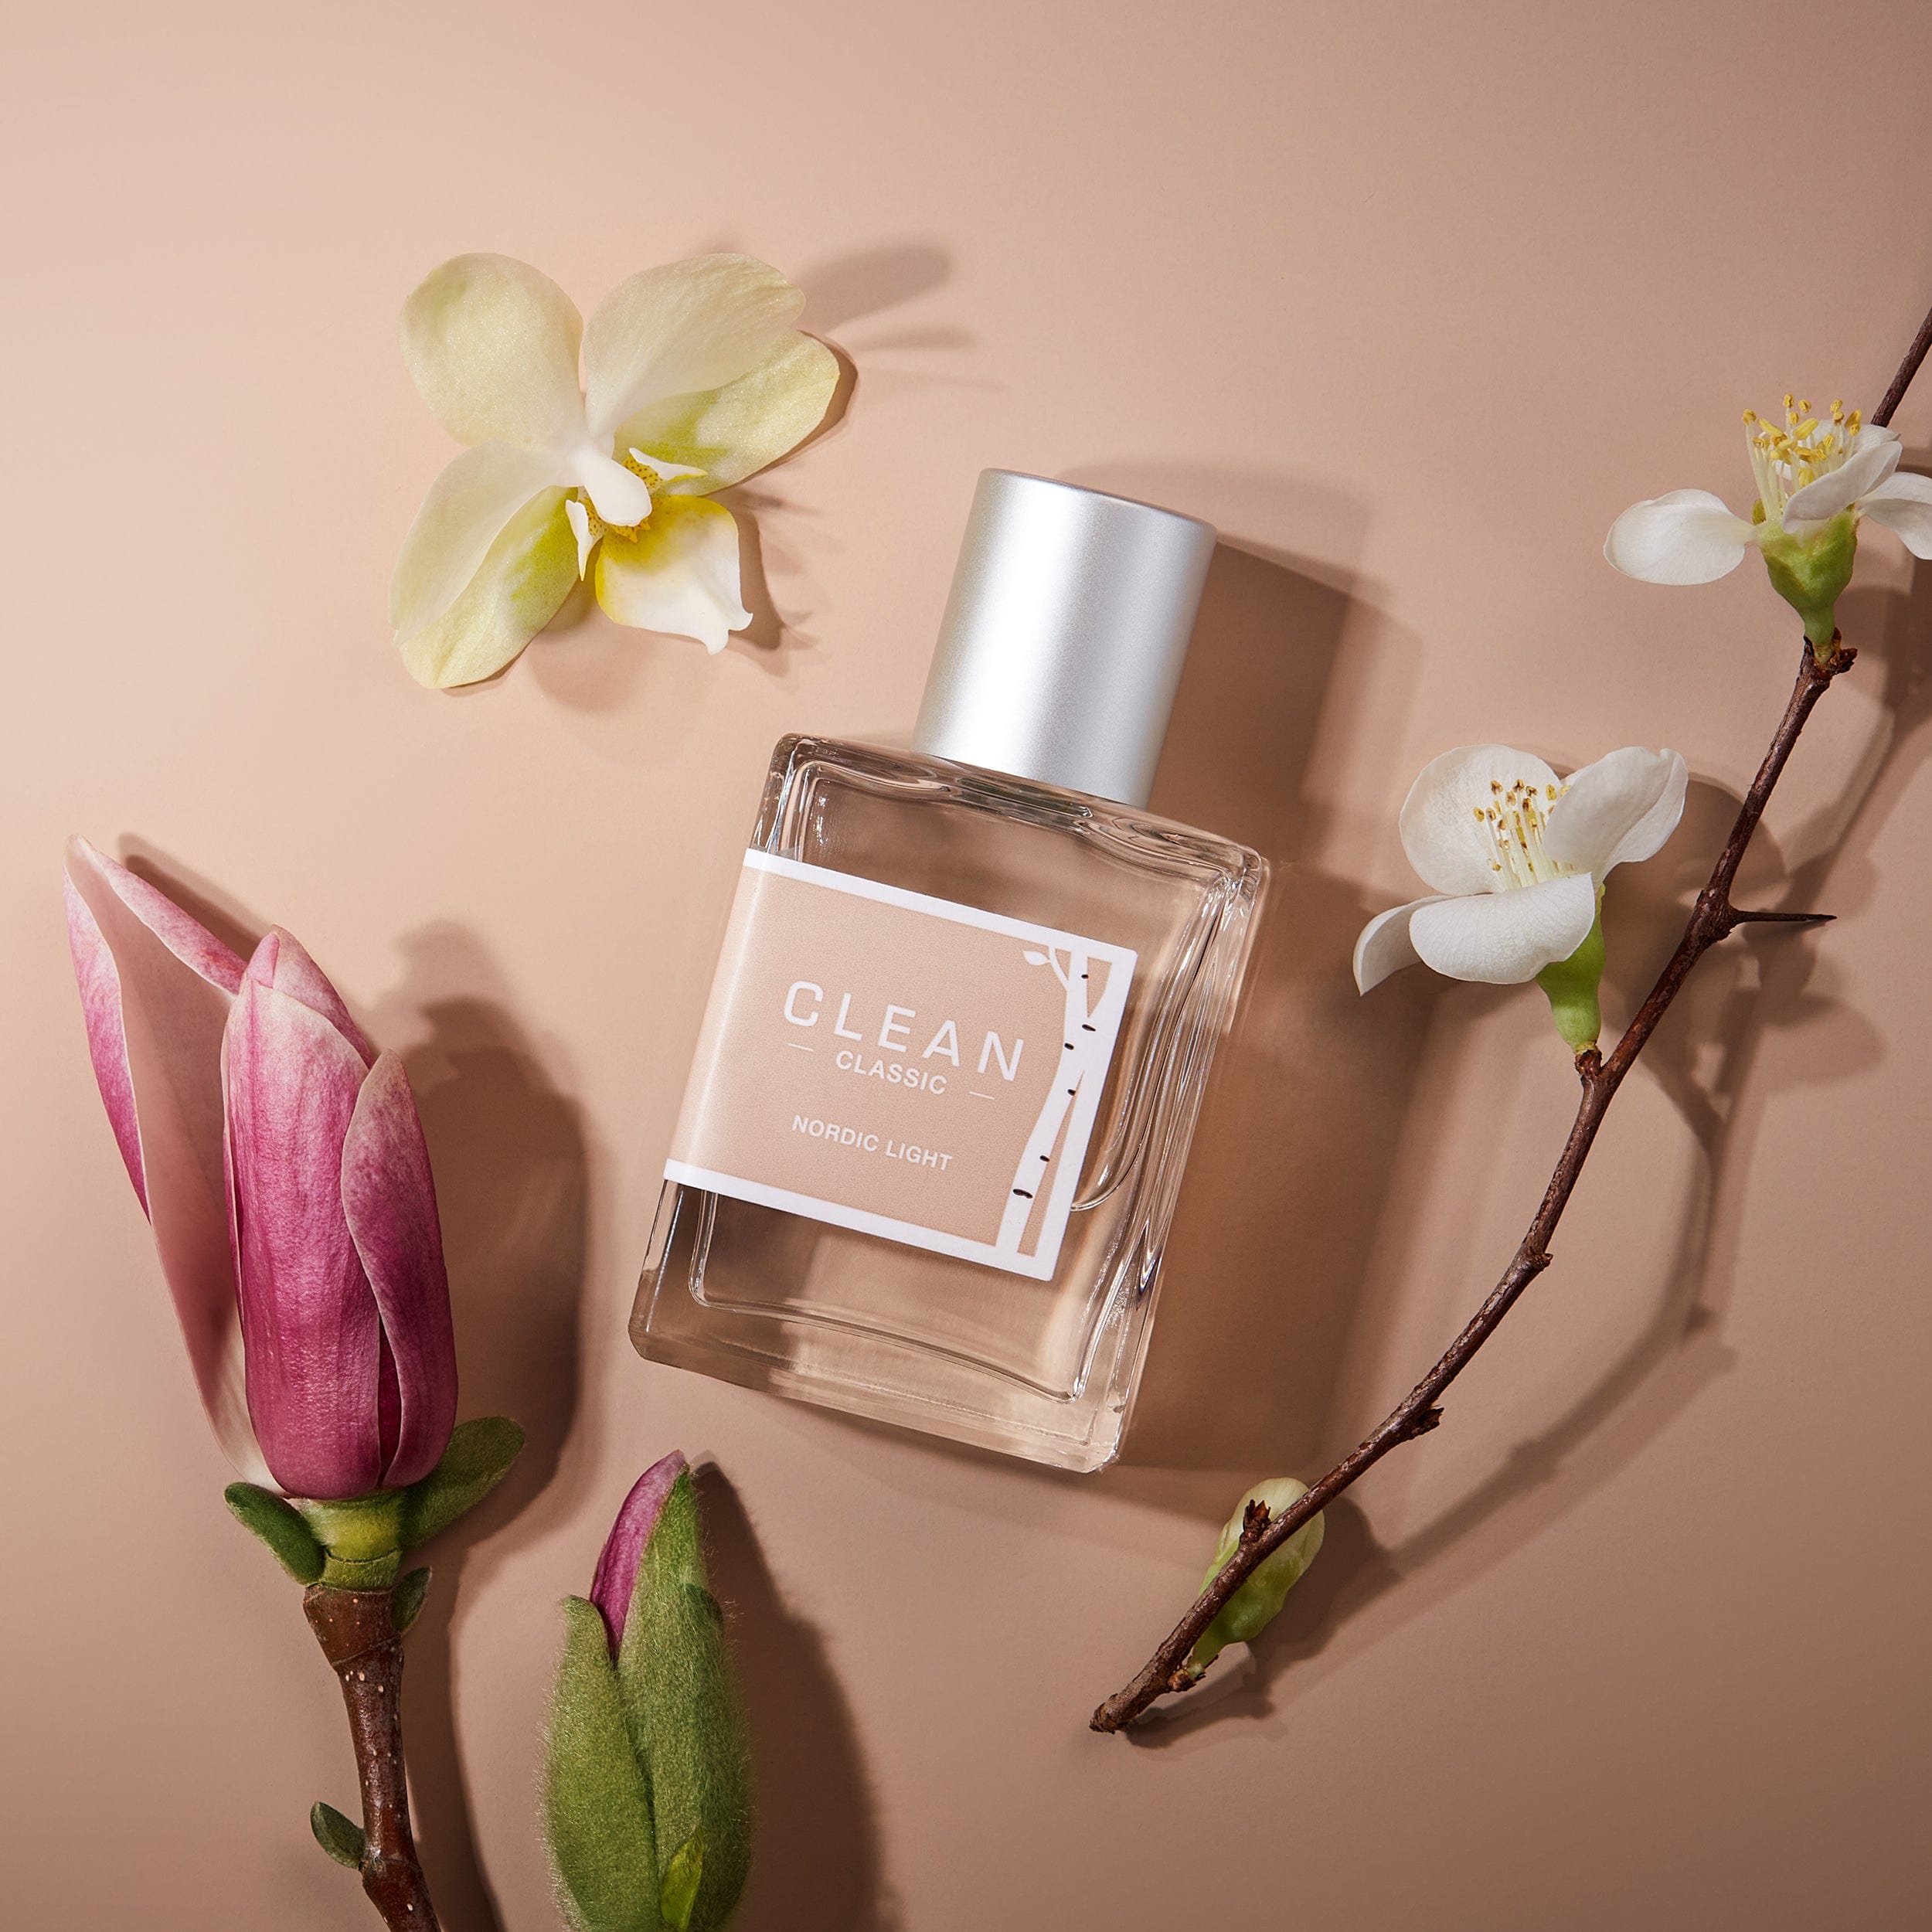 Cruelty-Free Perfume Guide: Fragrance Companies That Do And Don't